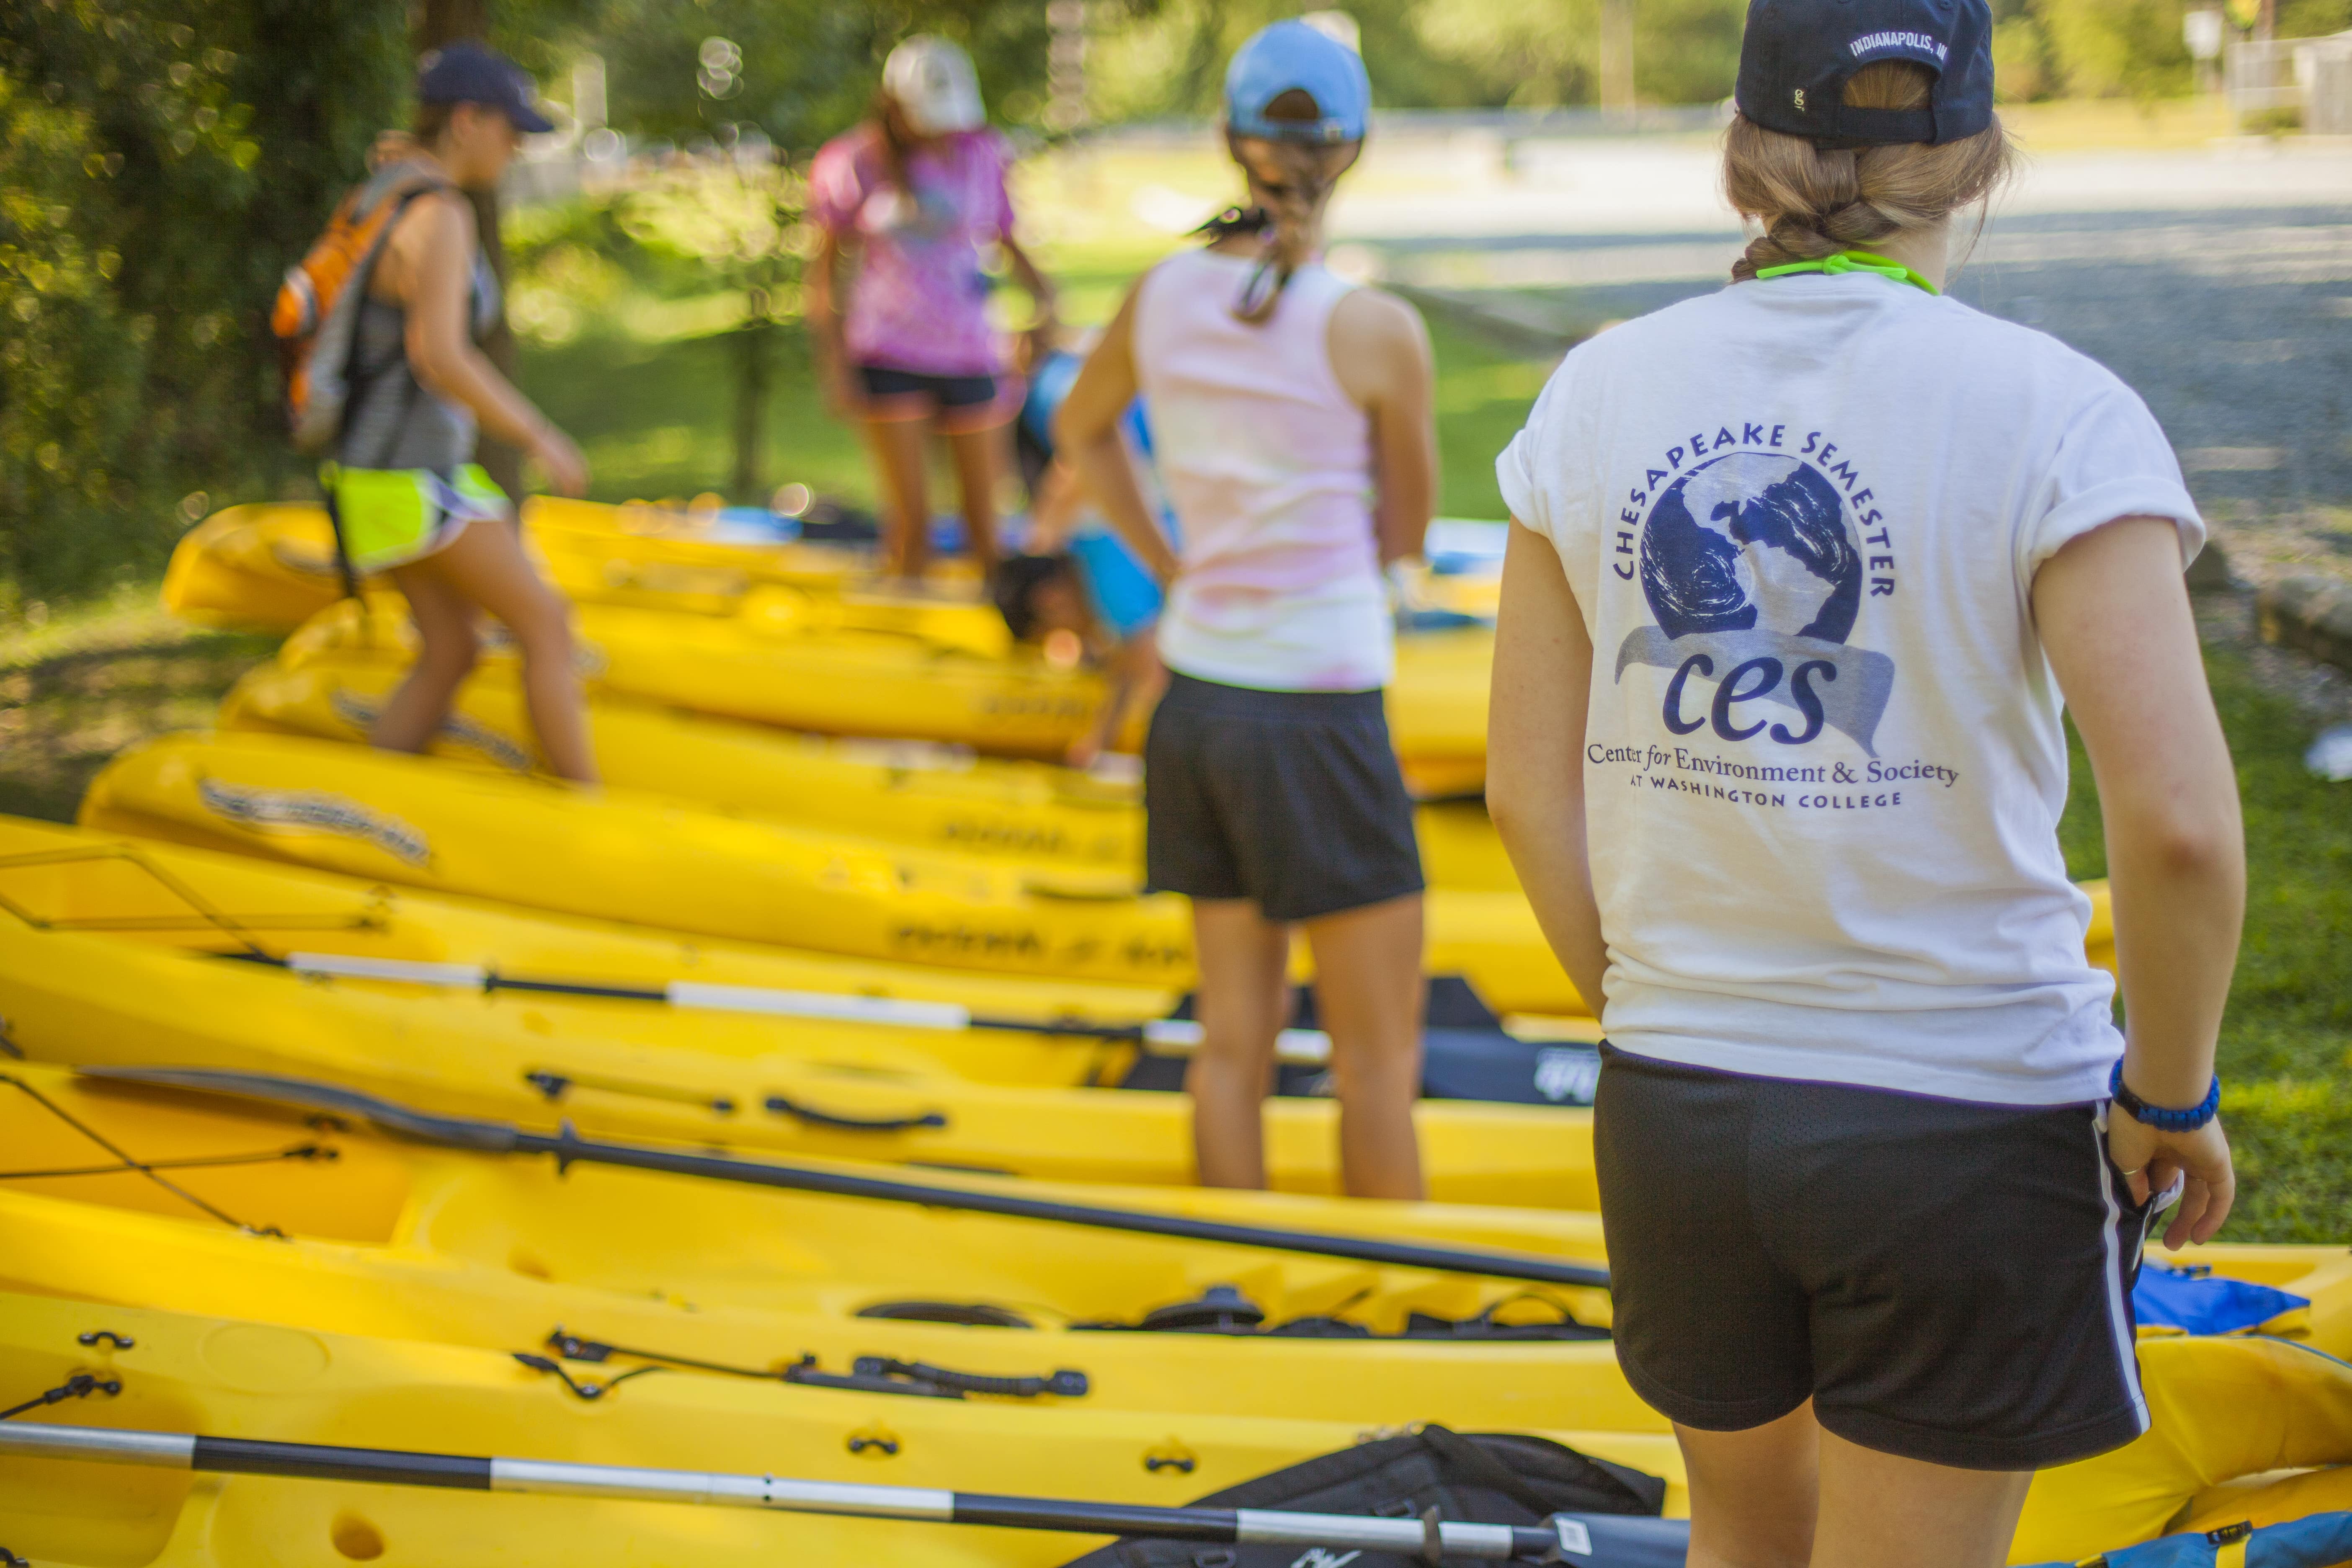 Chesapeake Semester participants prepare their kayaks for the river